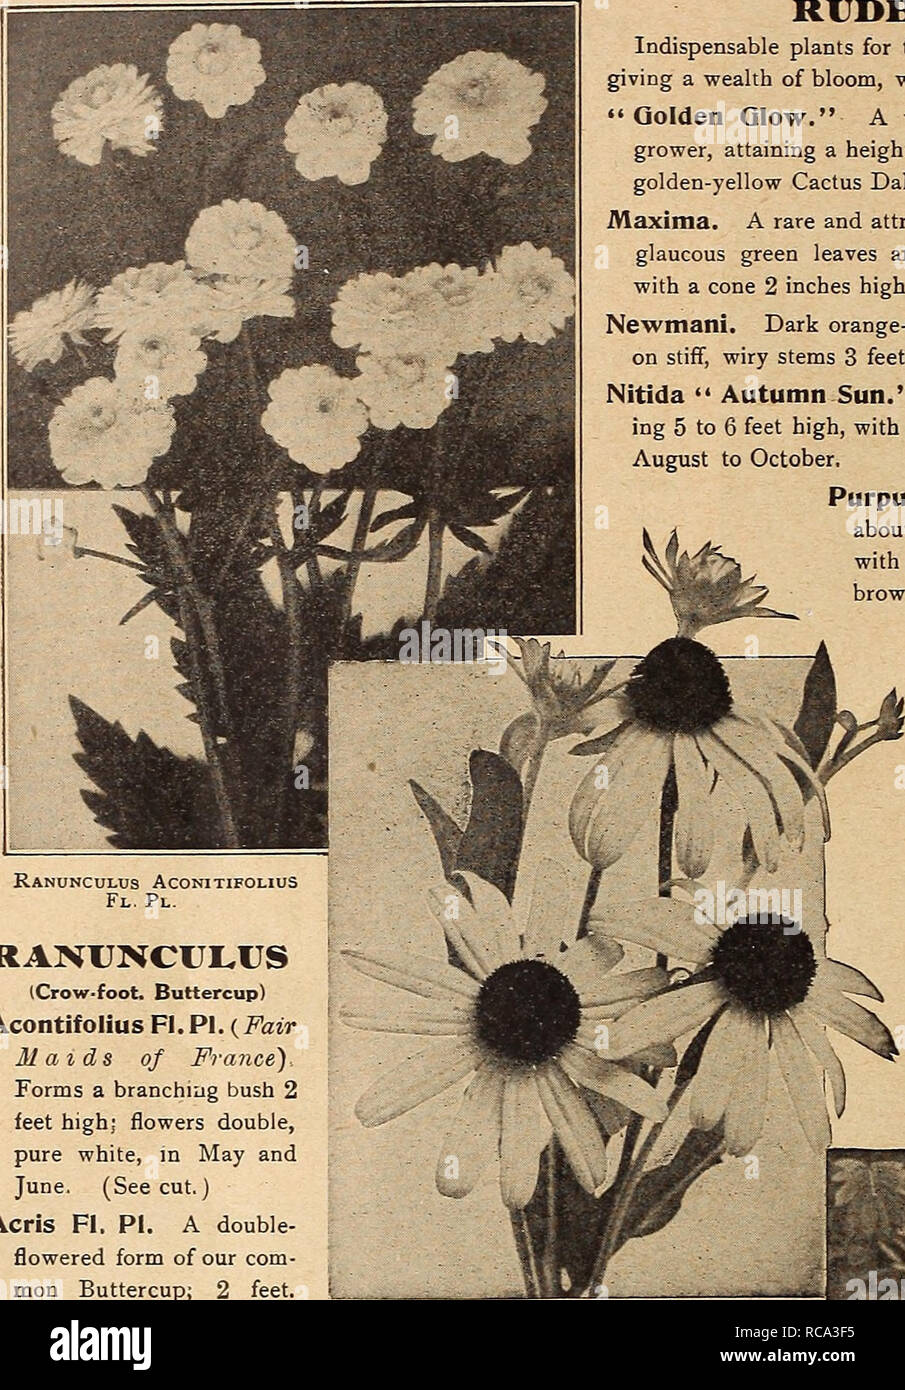 . Dreer's garden book 1919. Seeds Catalogs; Nursery stock Catalogs; Gardening Equipment and supplies Catalogs; Flowers Seeds Catalogs; Vegetables Seeds Catalogs; Fruit Seeds Catalogs. 198 m NWADREffi 4&gt;l1llADELPHIAJ&gt;AmHARDY PERENNIAL PbANTi. RANUNCULUS (Crow-foot. Buttercup) Acontifolius Fl. PI. (Fair Maids of France). Forms a branching bush 2 feet high; flowers double, pure white, in May and June. (See cut.) Acris Fl. PI. A double- flowered form of our com- mon Buttercup; 2 feet. May and June. 25 cts. each; $2.50 per doz. RUDBECKIA (Cone-flower) Indispensable plants for the hardy border Stock Photo